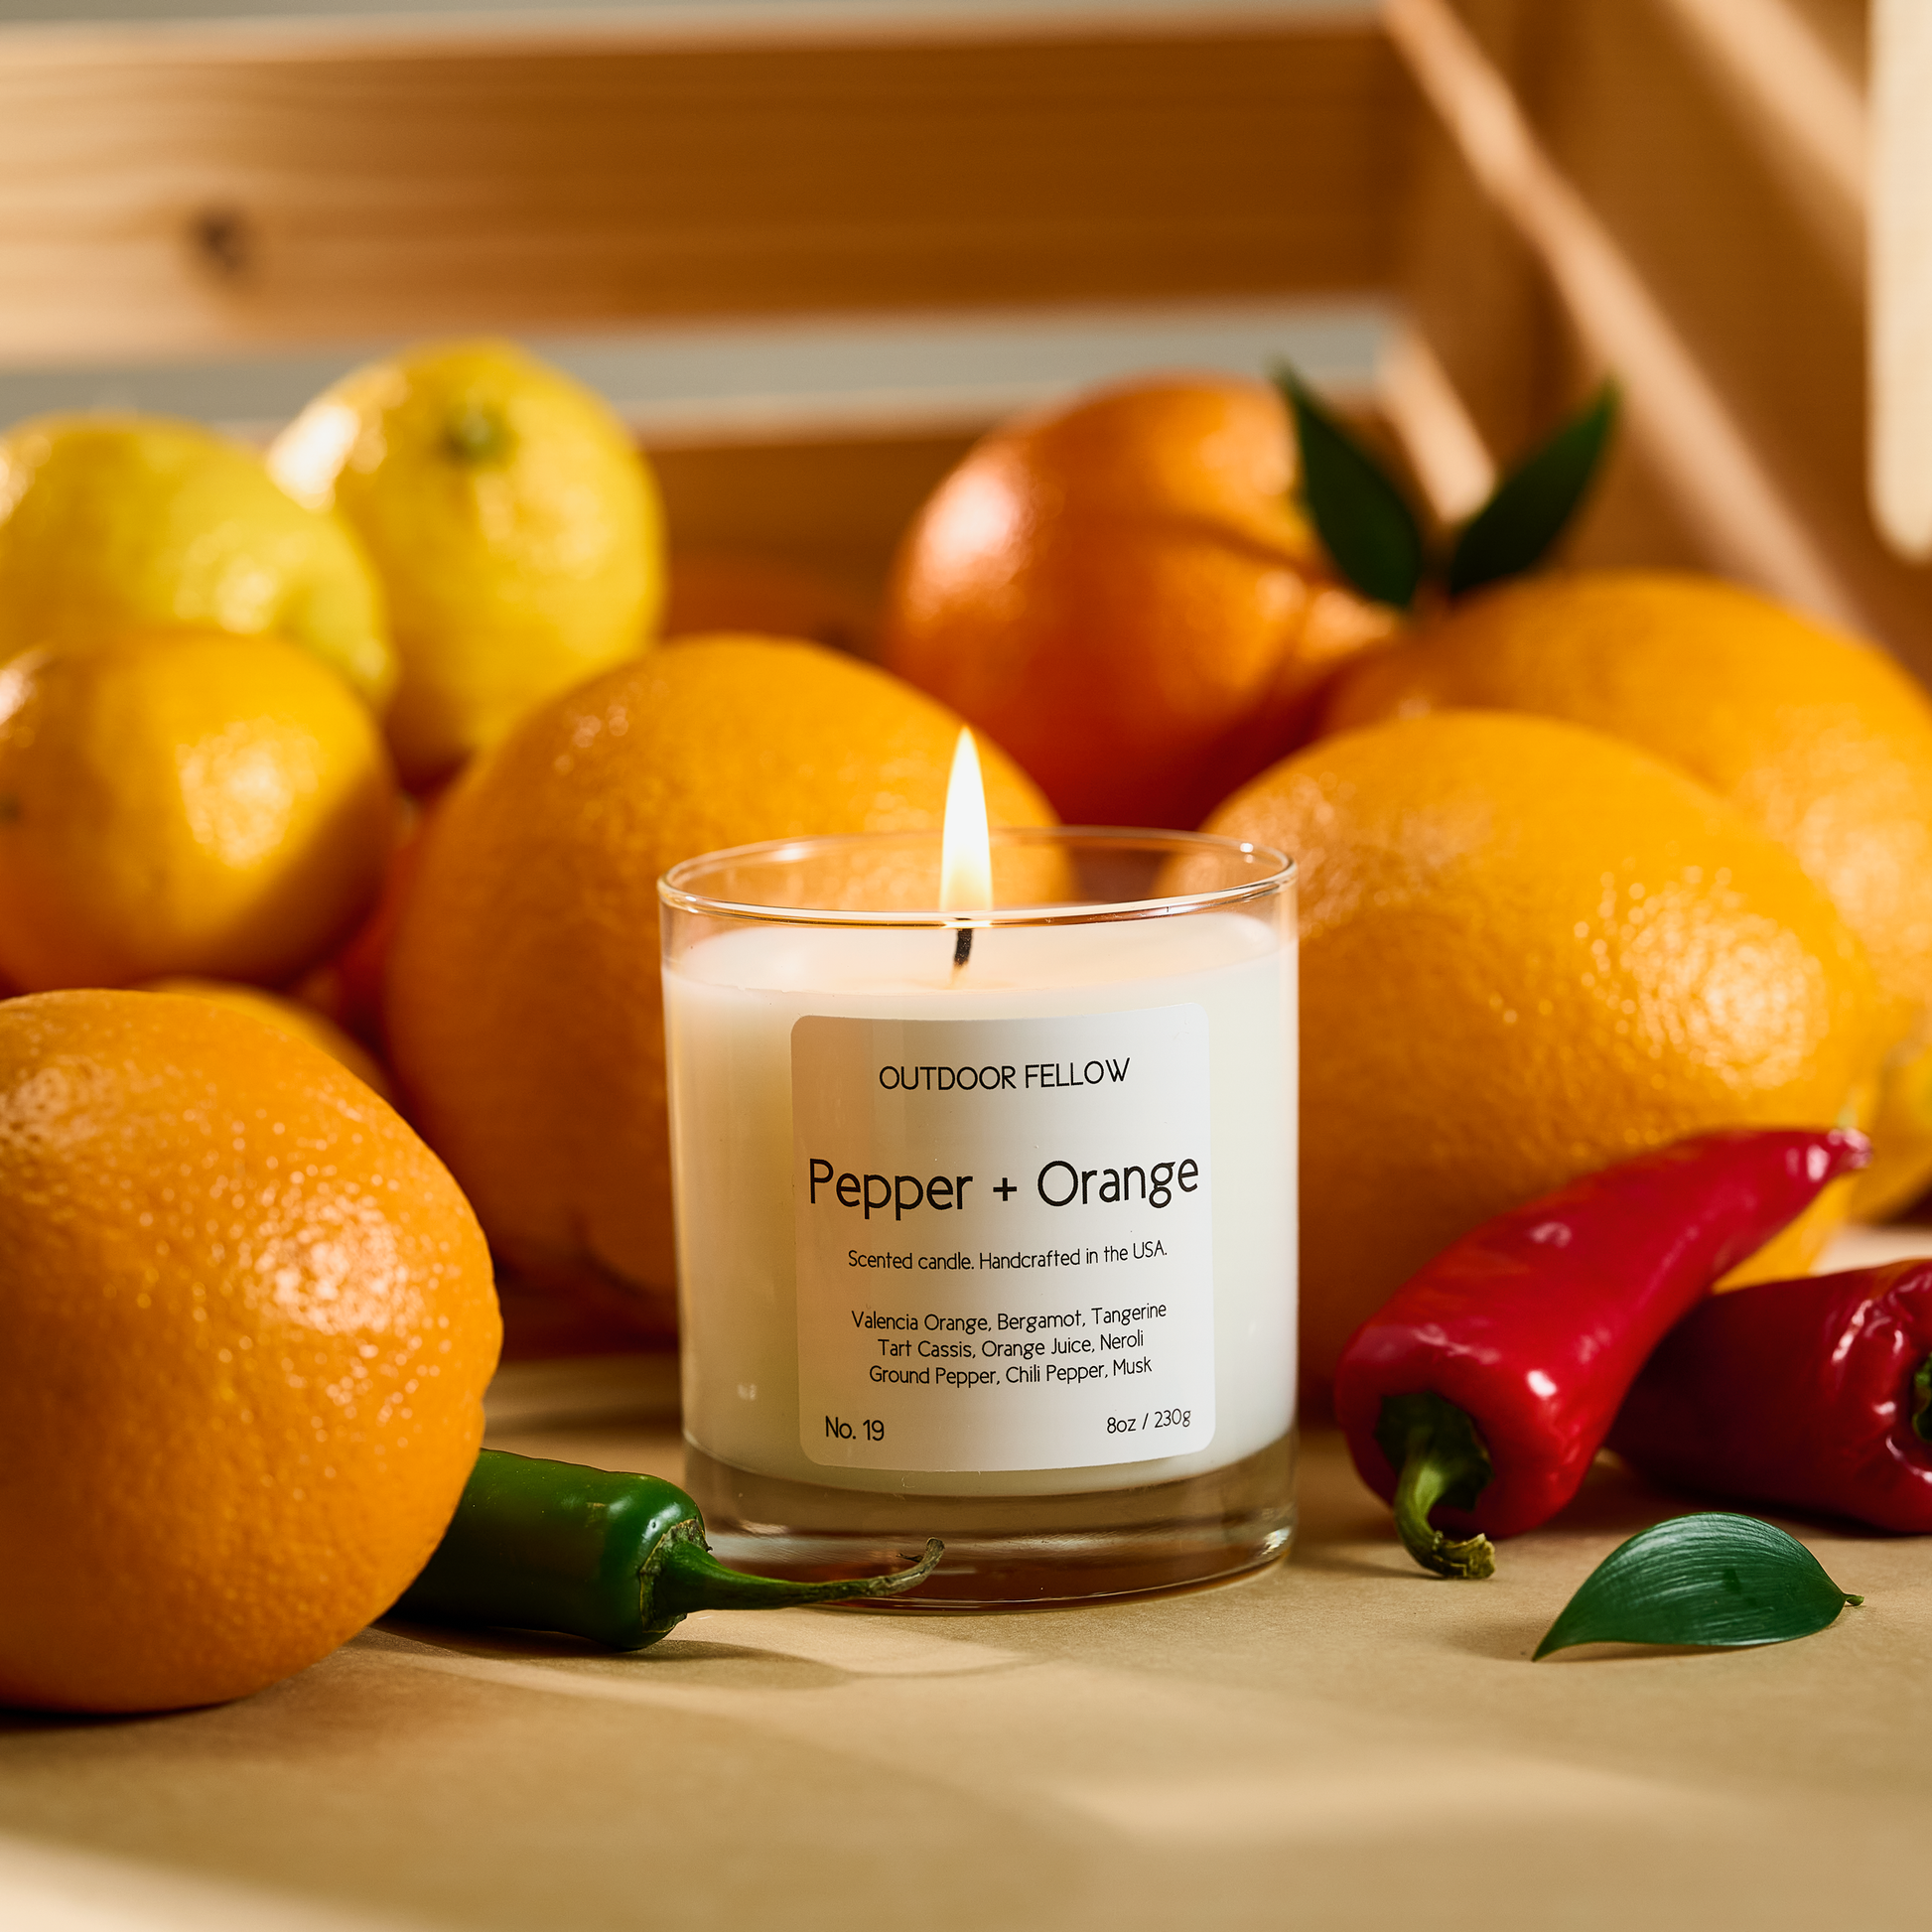 Pepper and Orange scented candle surrounded by oranges, lemons and chili peppers